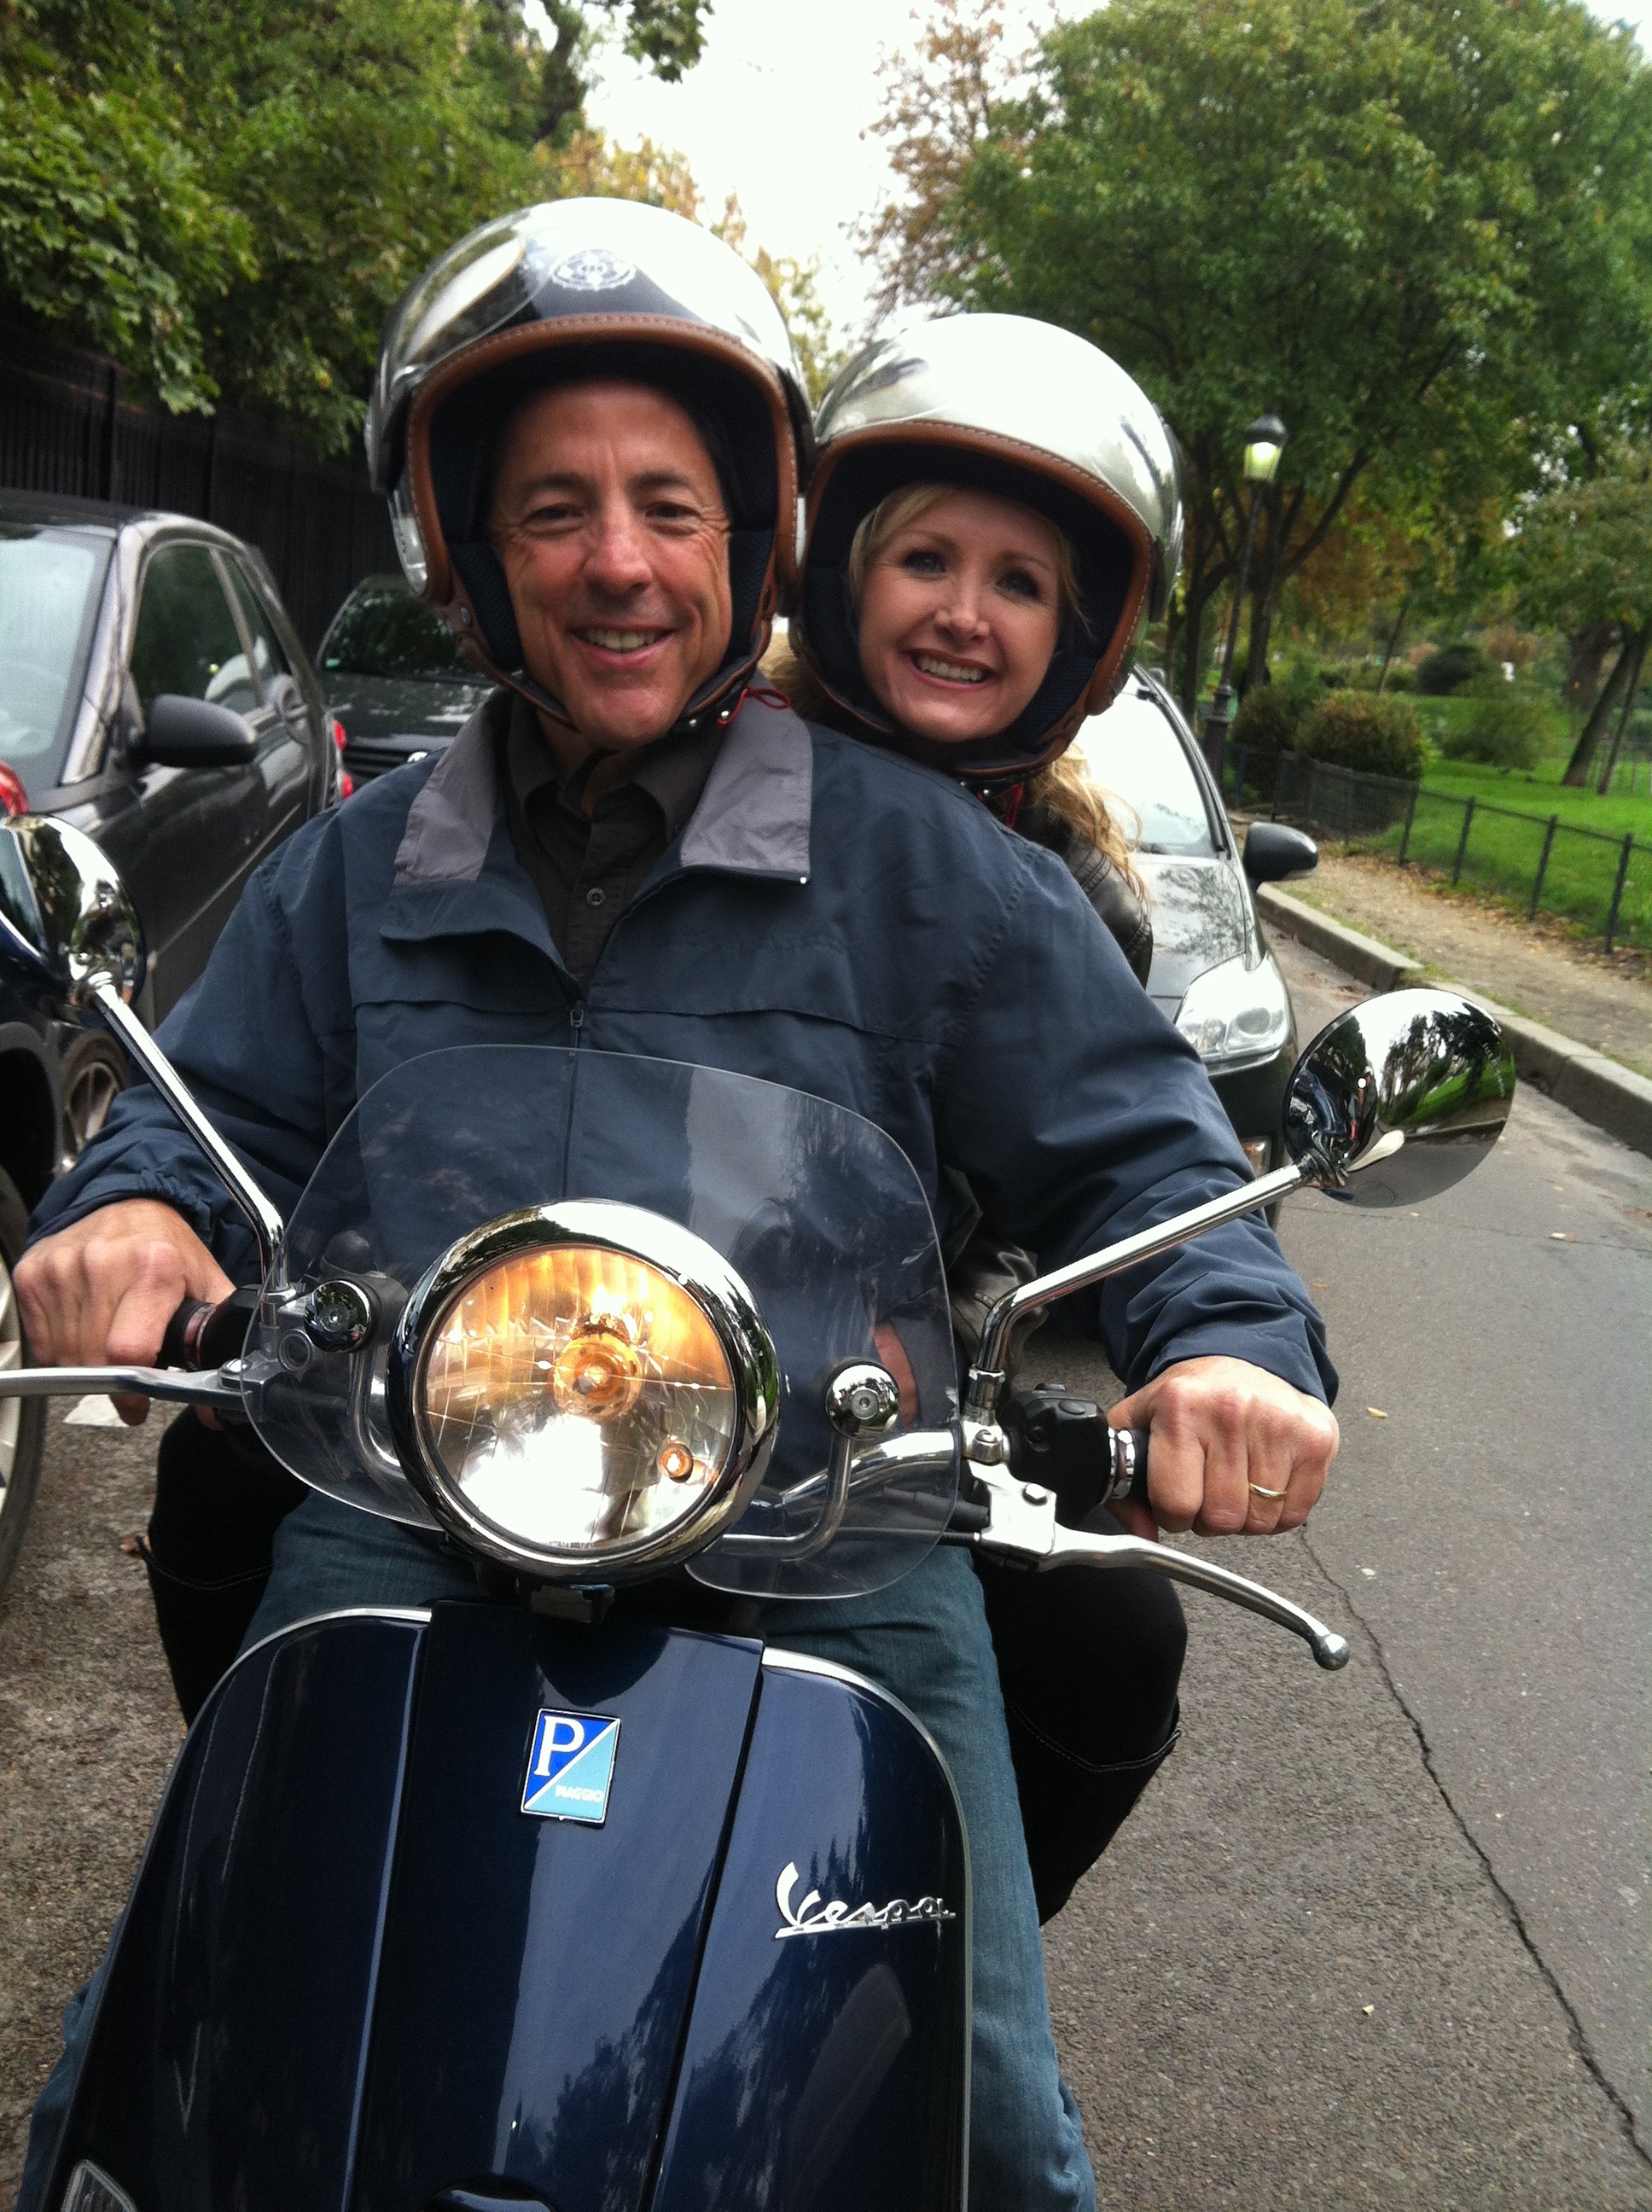 Carrie & Boby at the wheel of a Vespa scooter in the street of Paris France during a Paris sightseeing Tour.